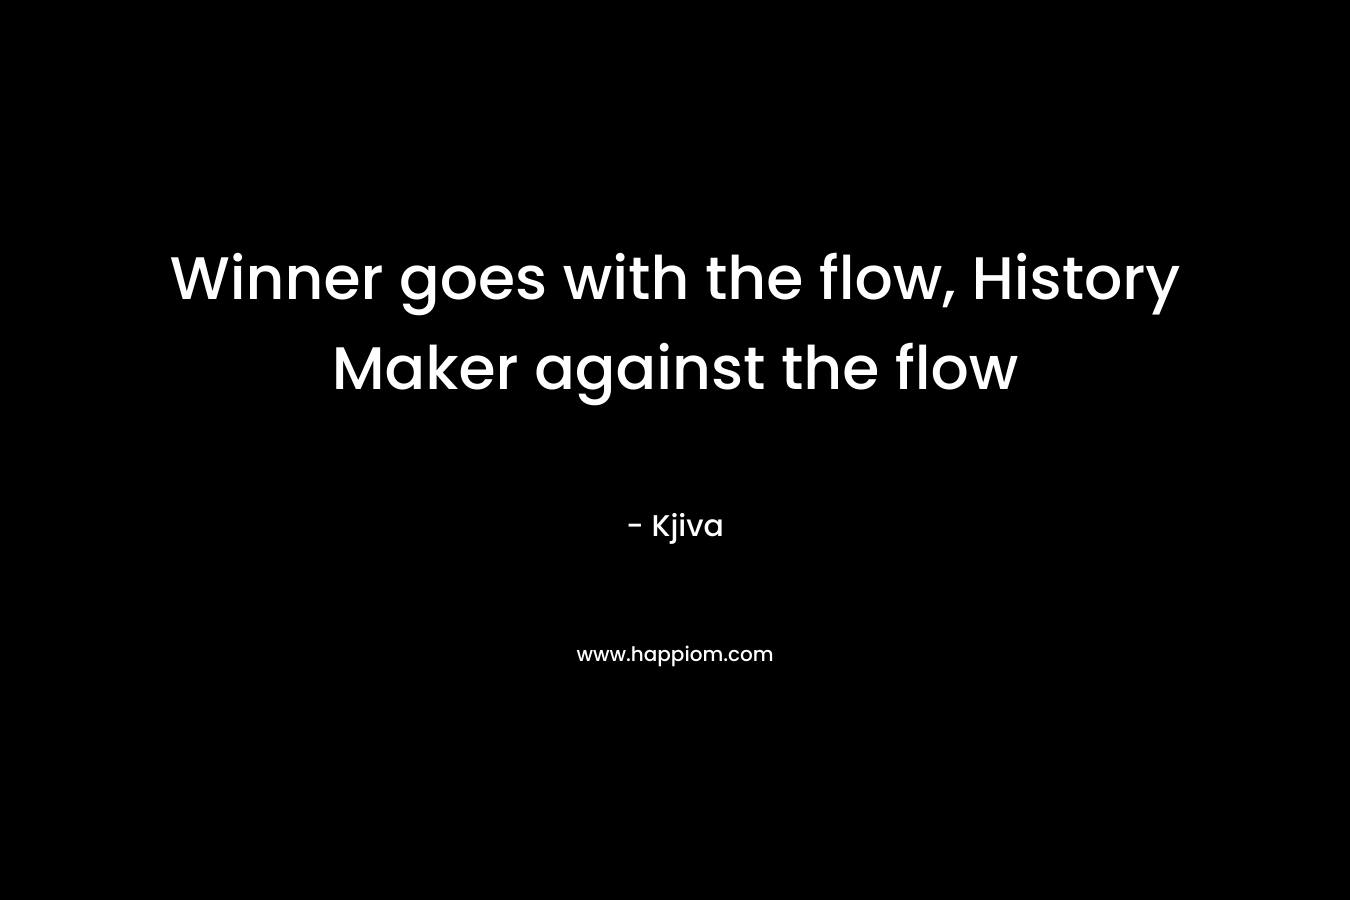 Winner goes with the flow, History Maker against the flow